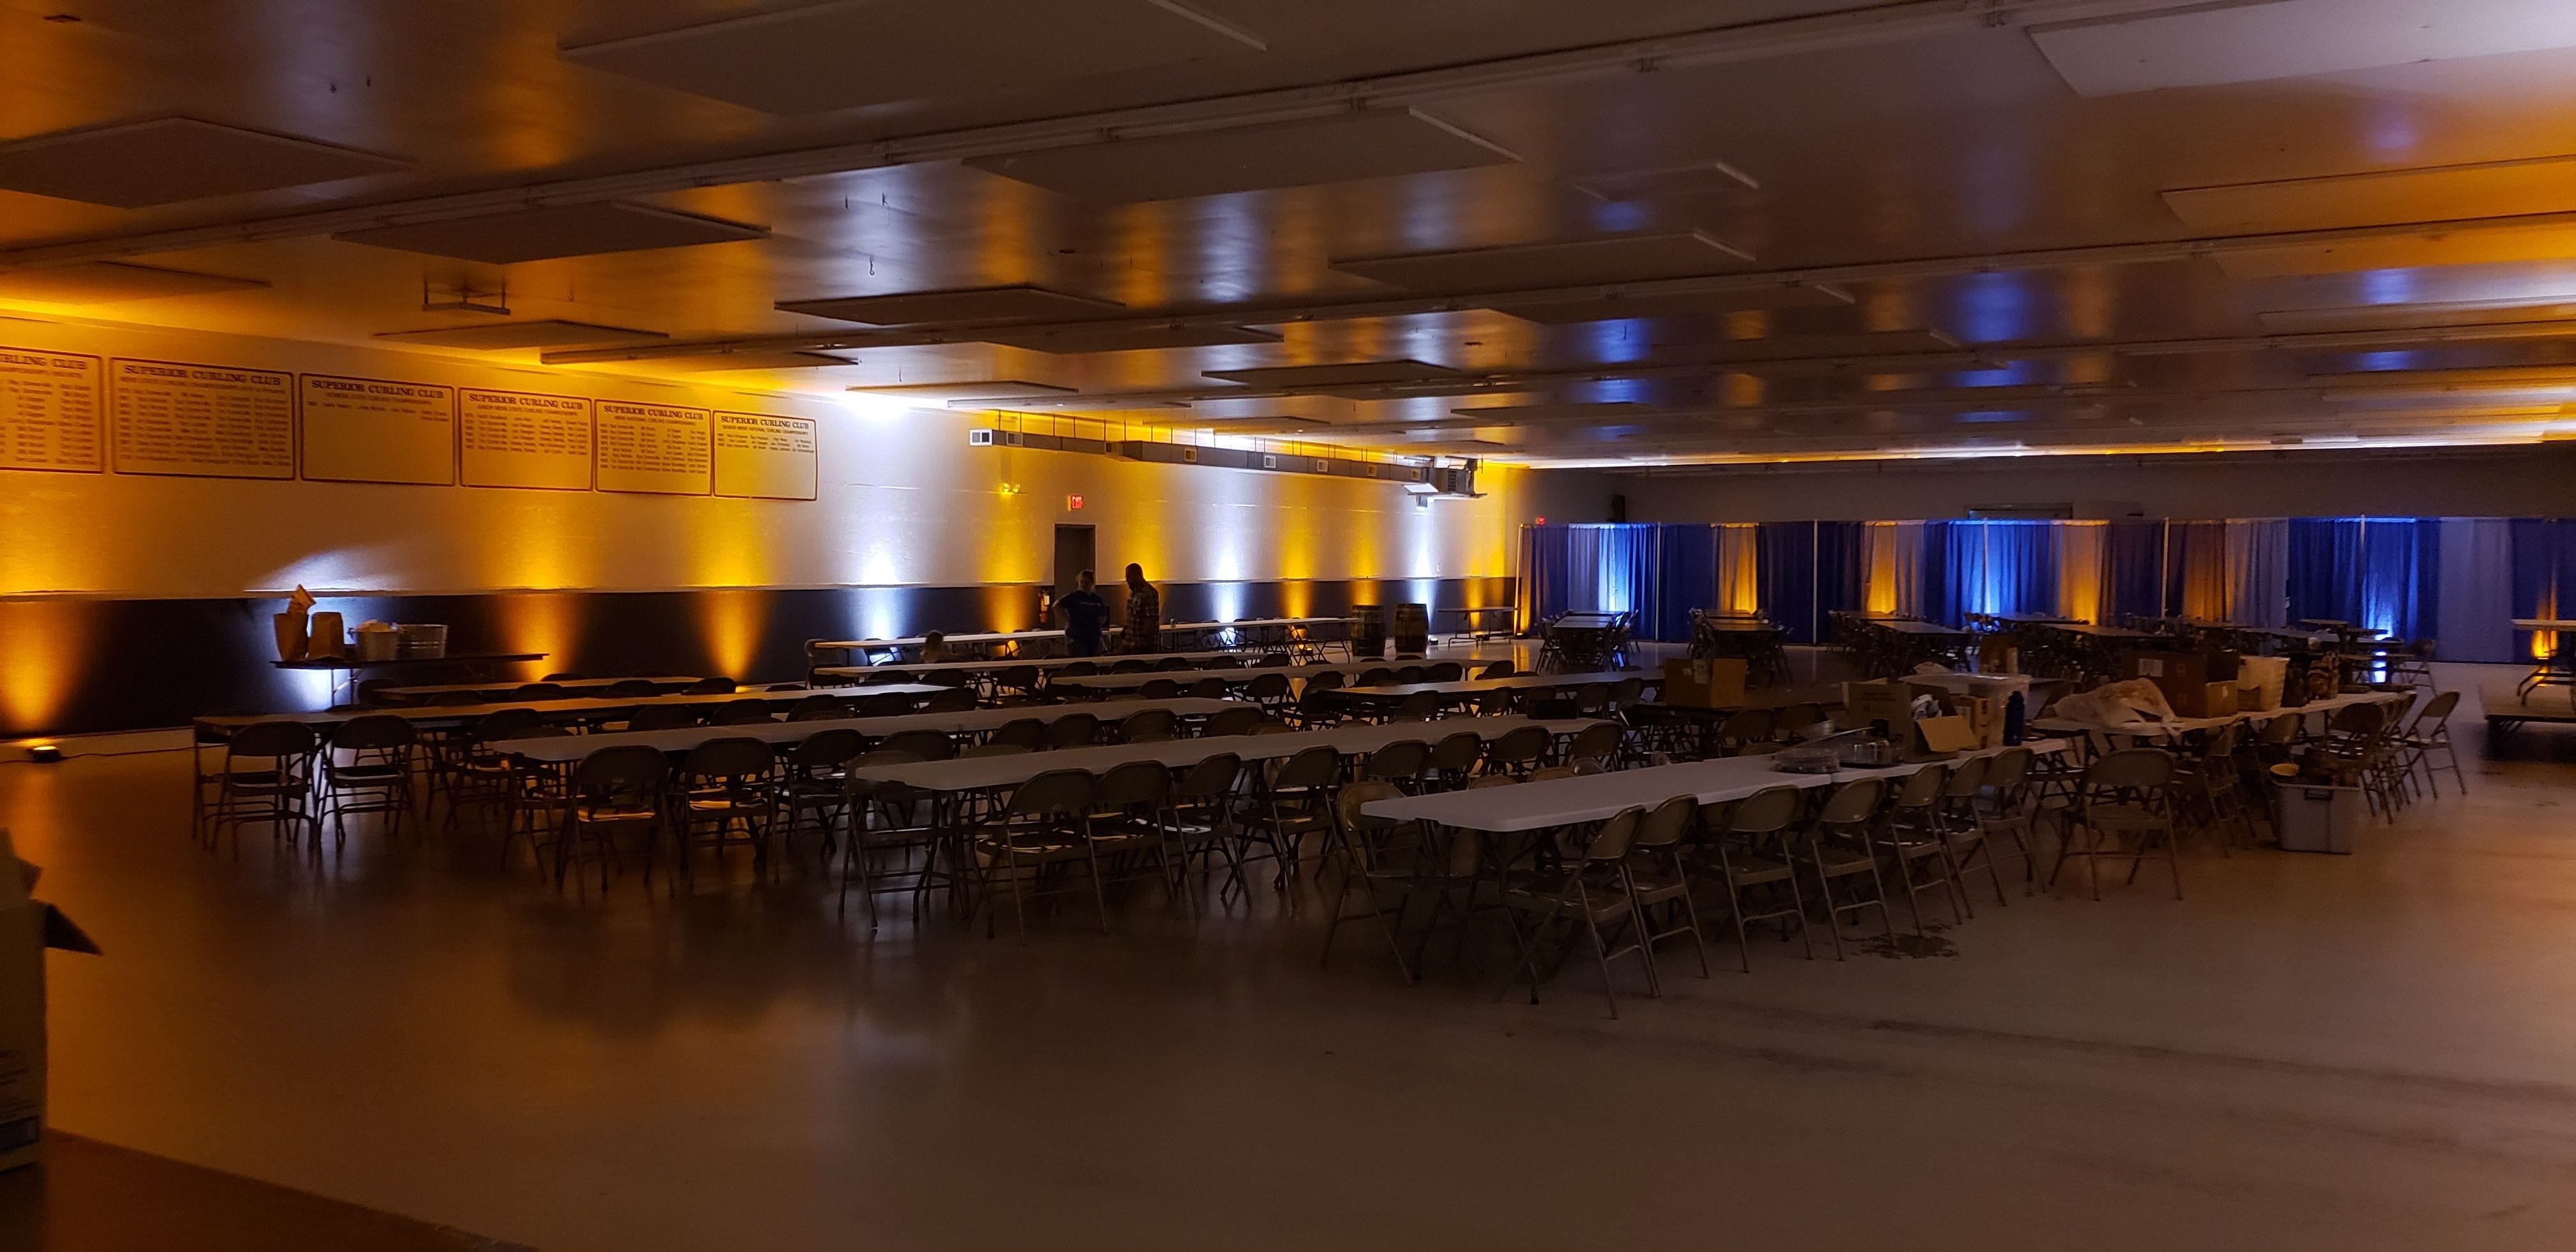 Superior Curling Club.
Up lighting in amber and soft white for a wedding.